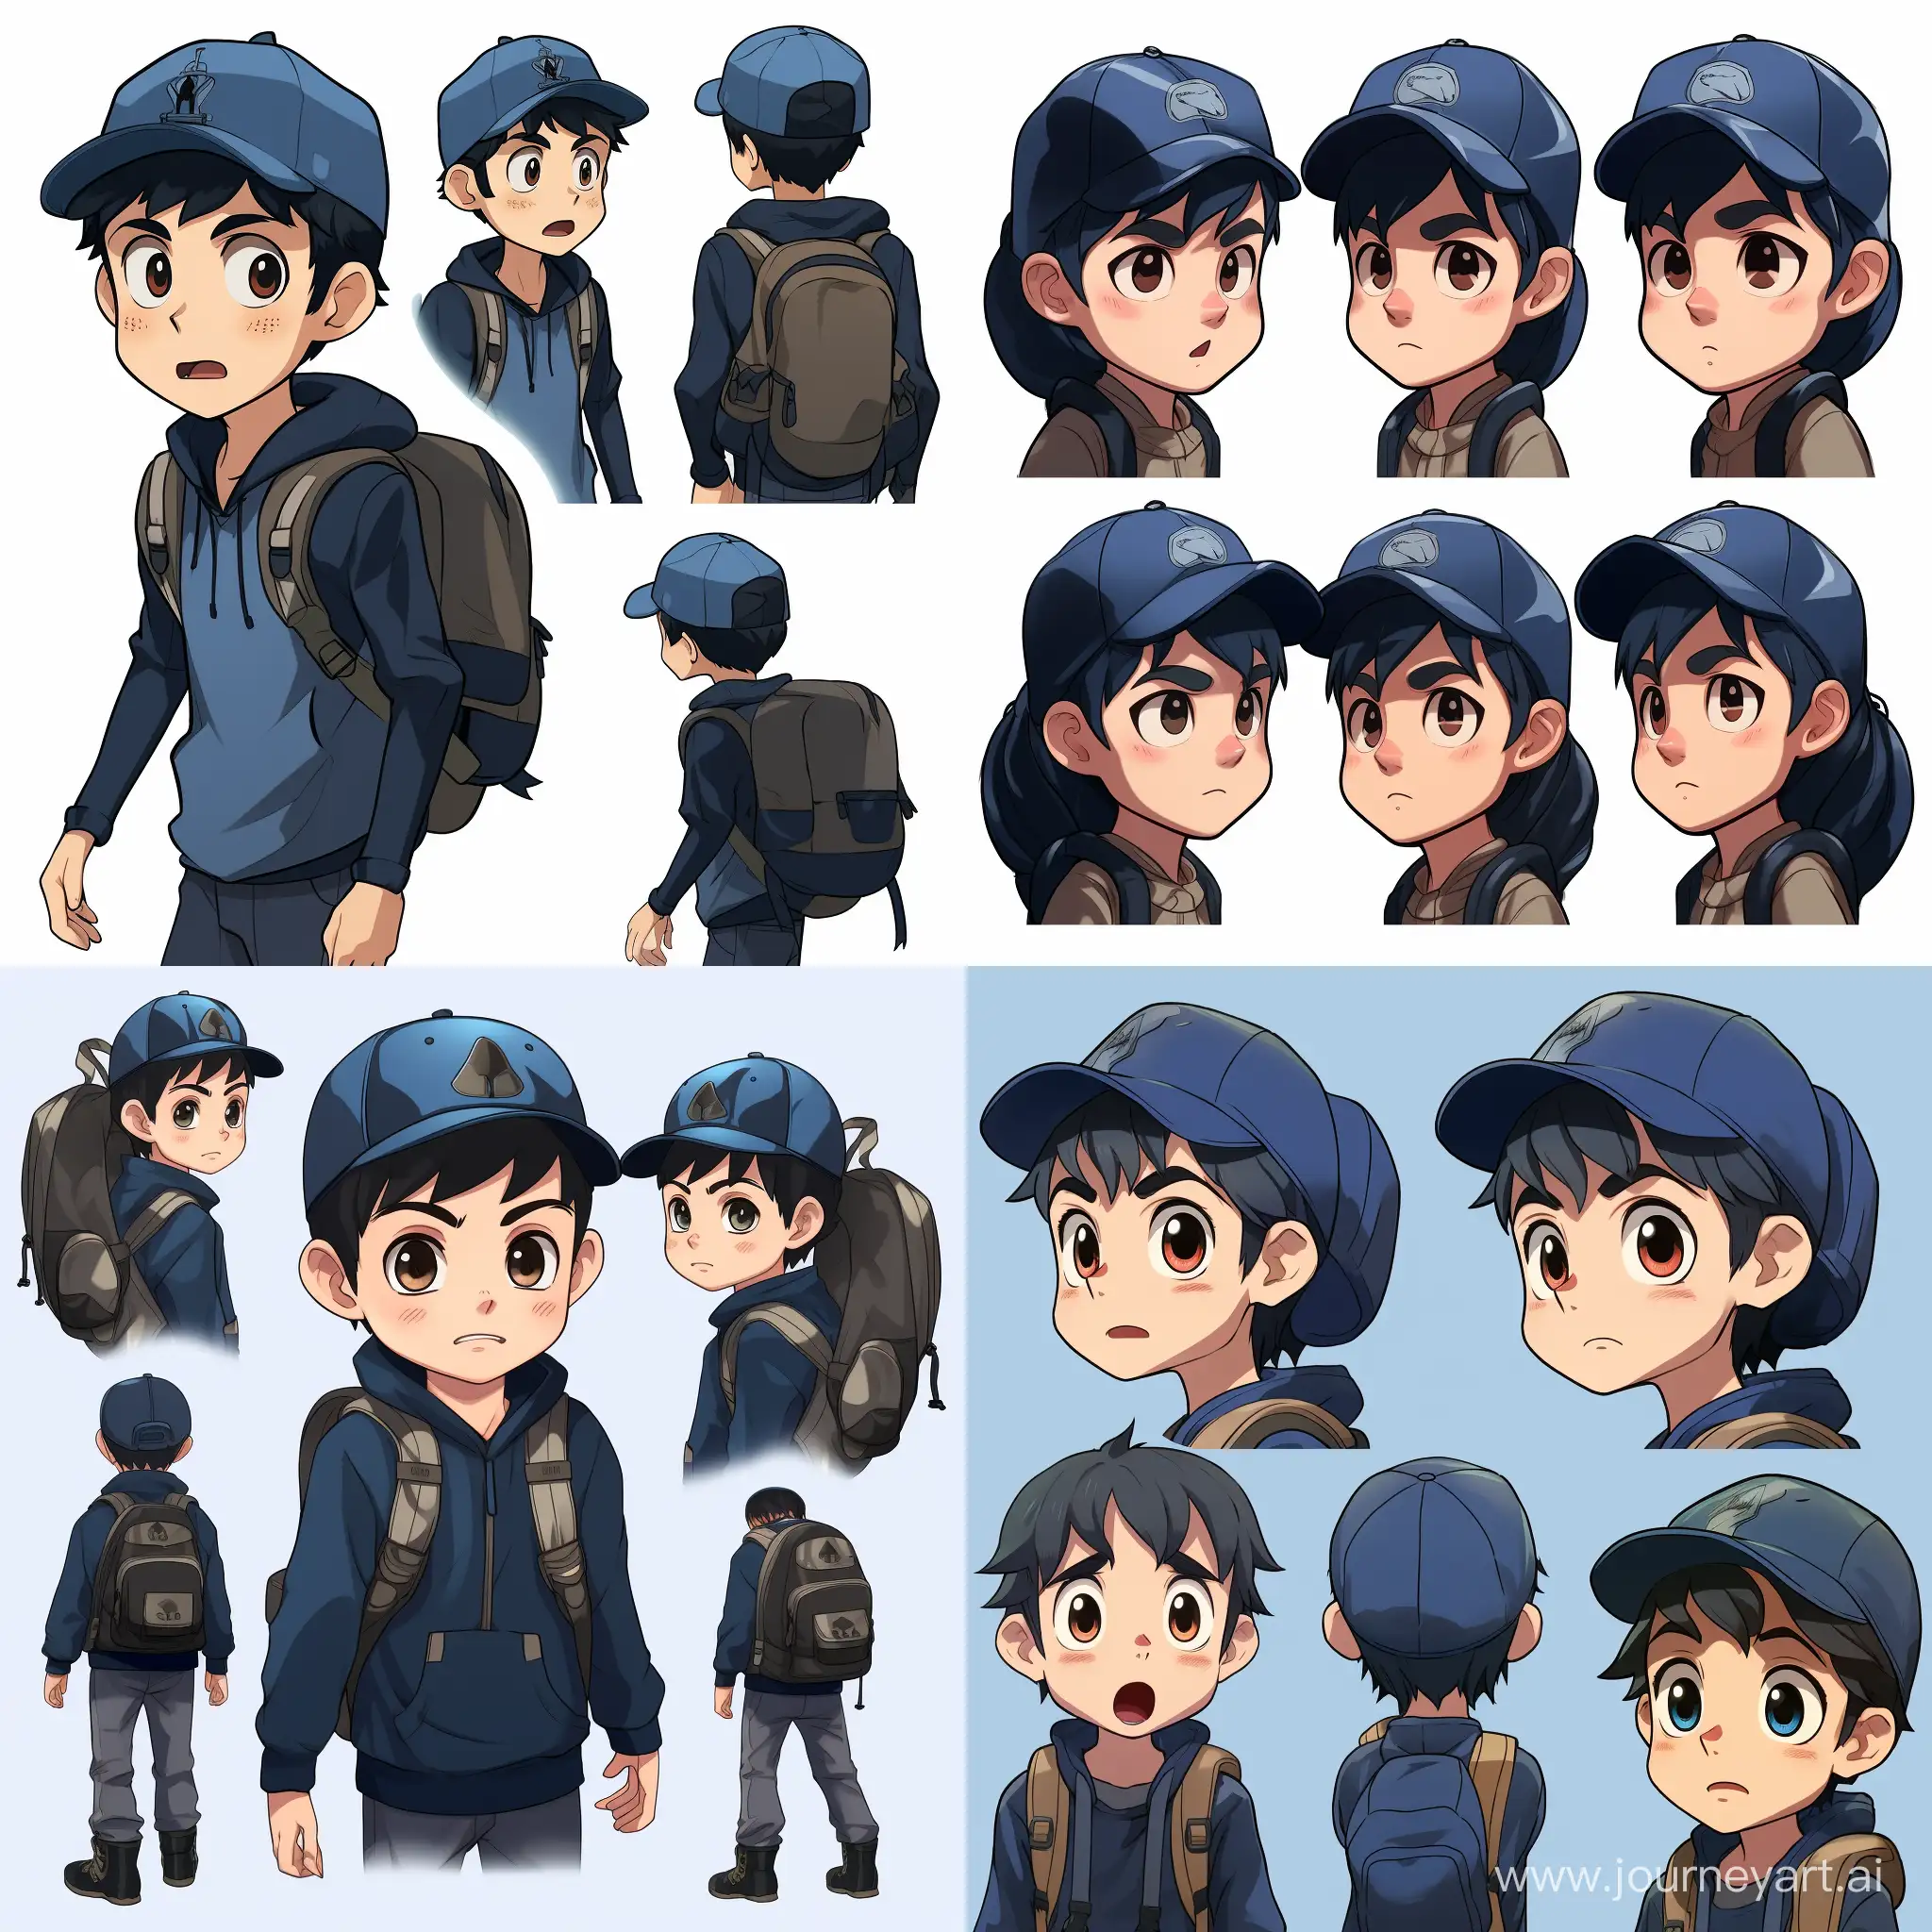 GhibliInspired-Anime-Boy-with-Stylish-Black-Cap-and-Gradient-Hair